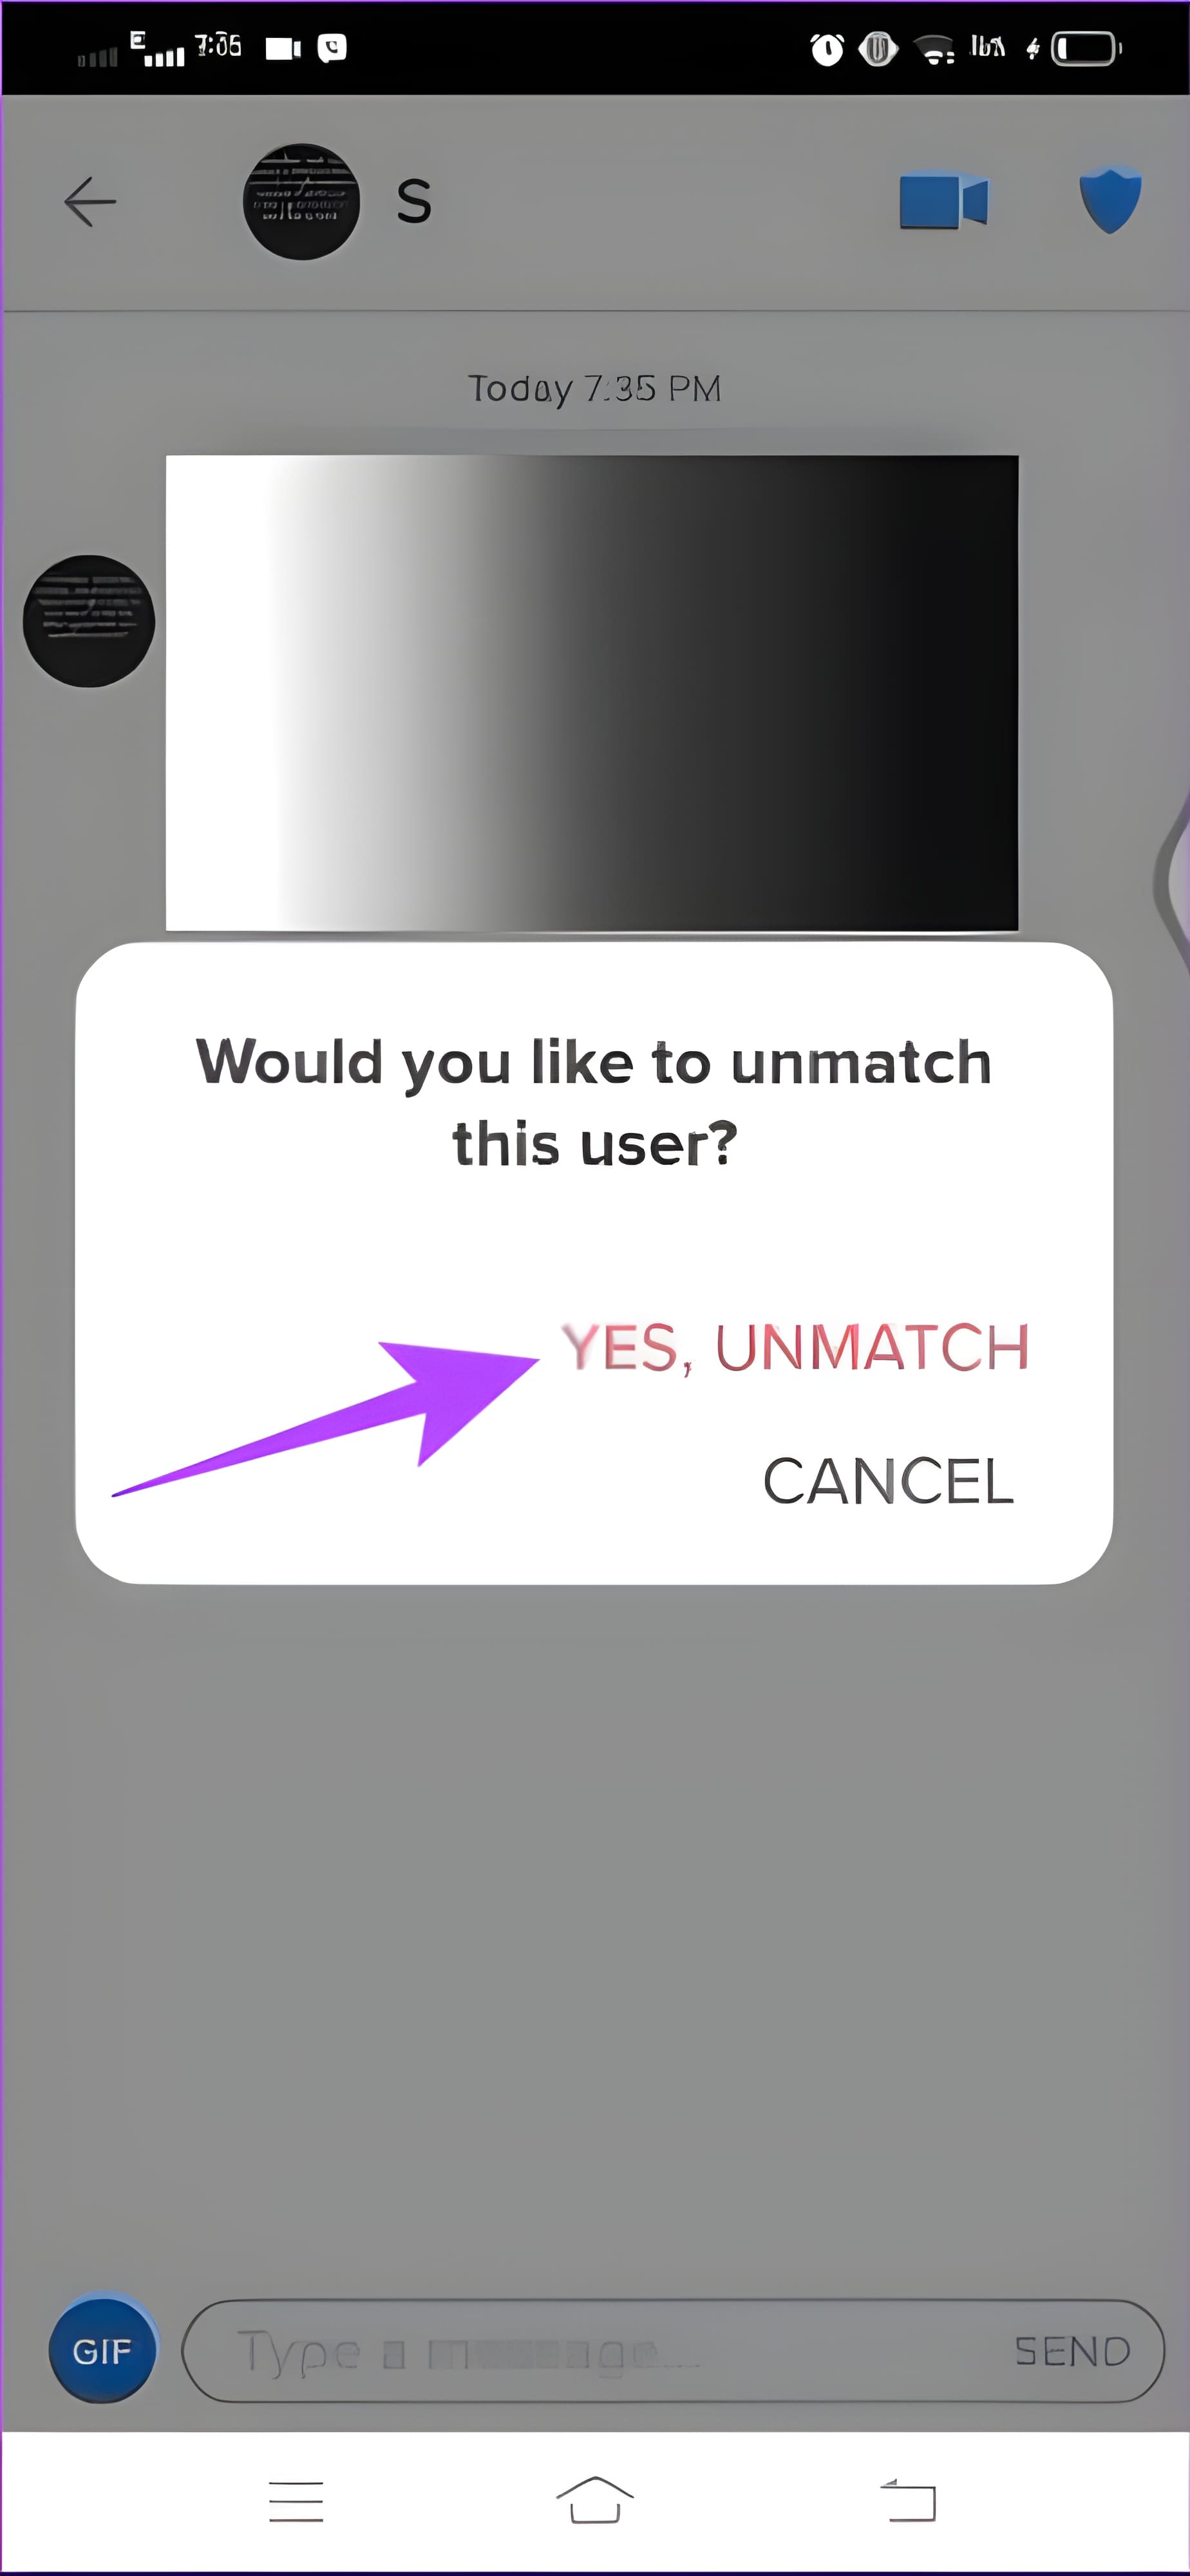 Click Yes unmatch to confirm 1